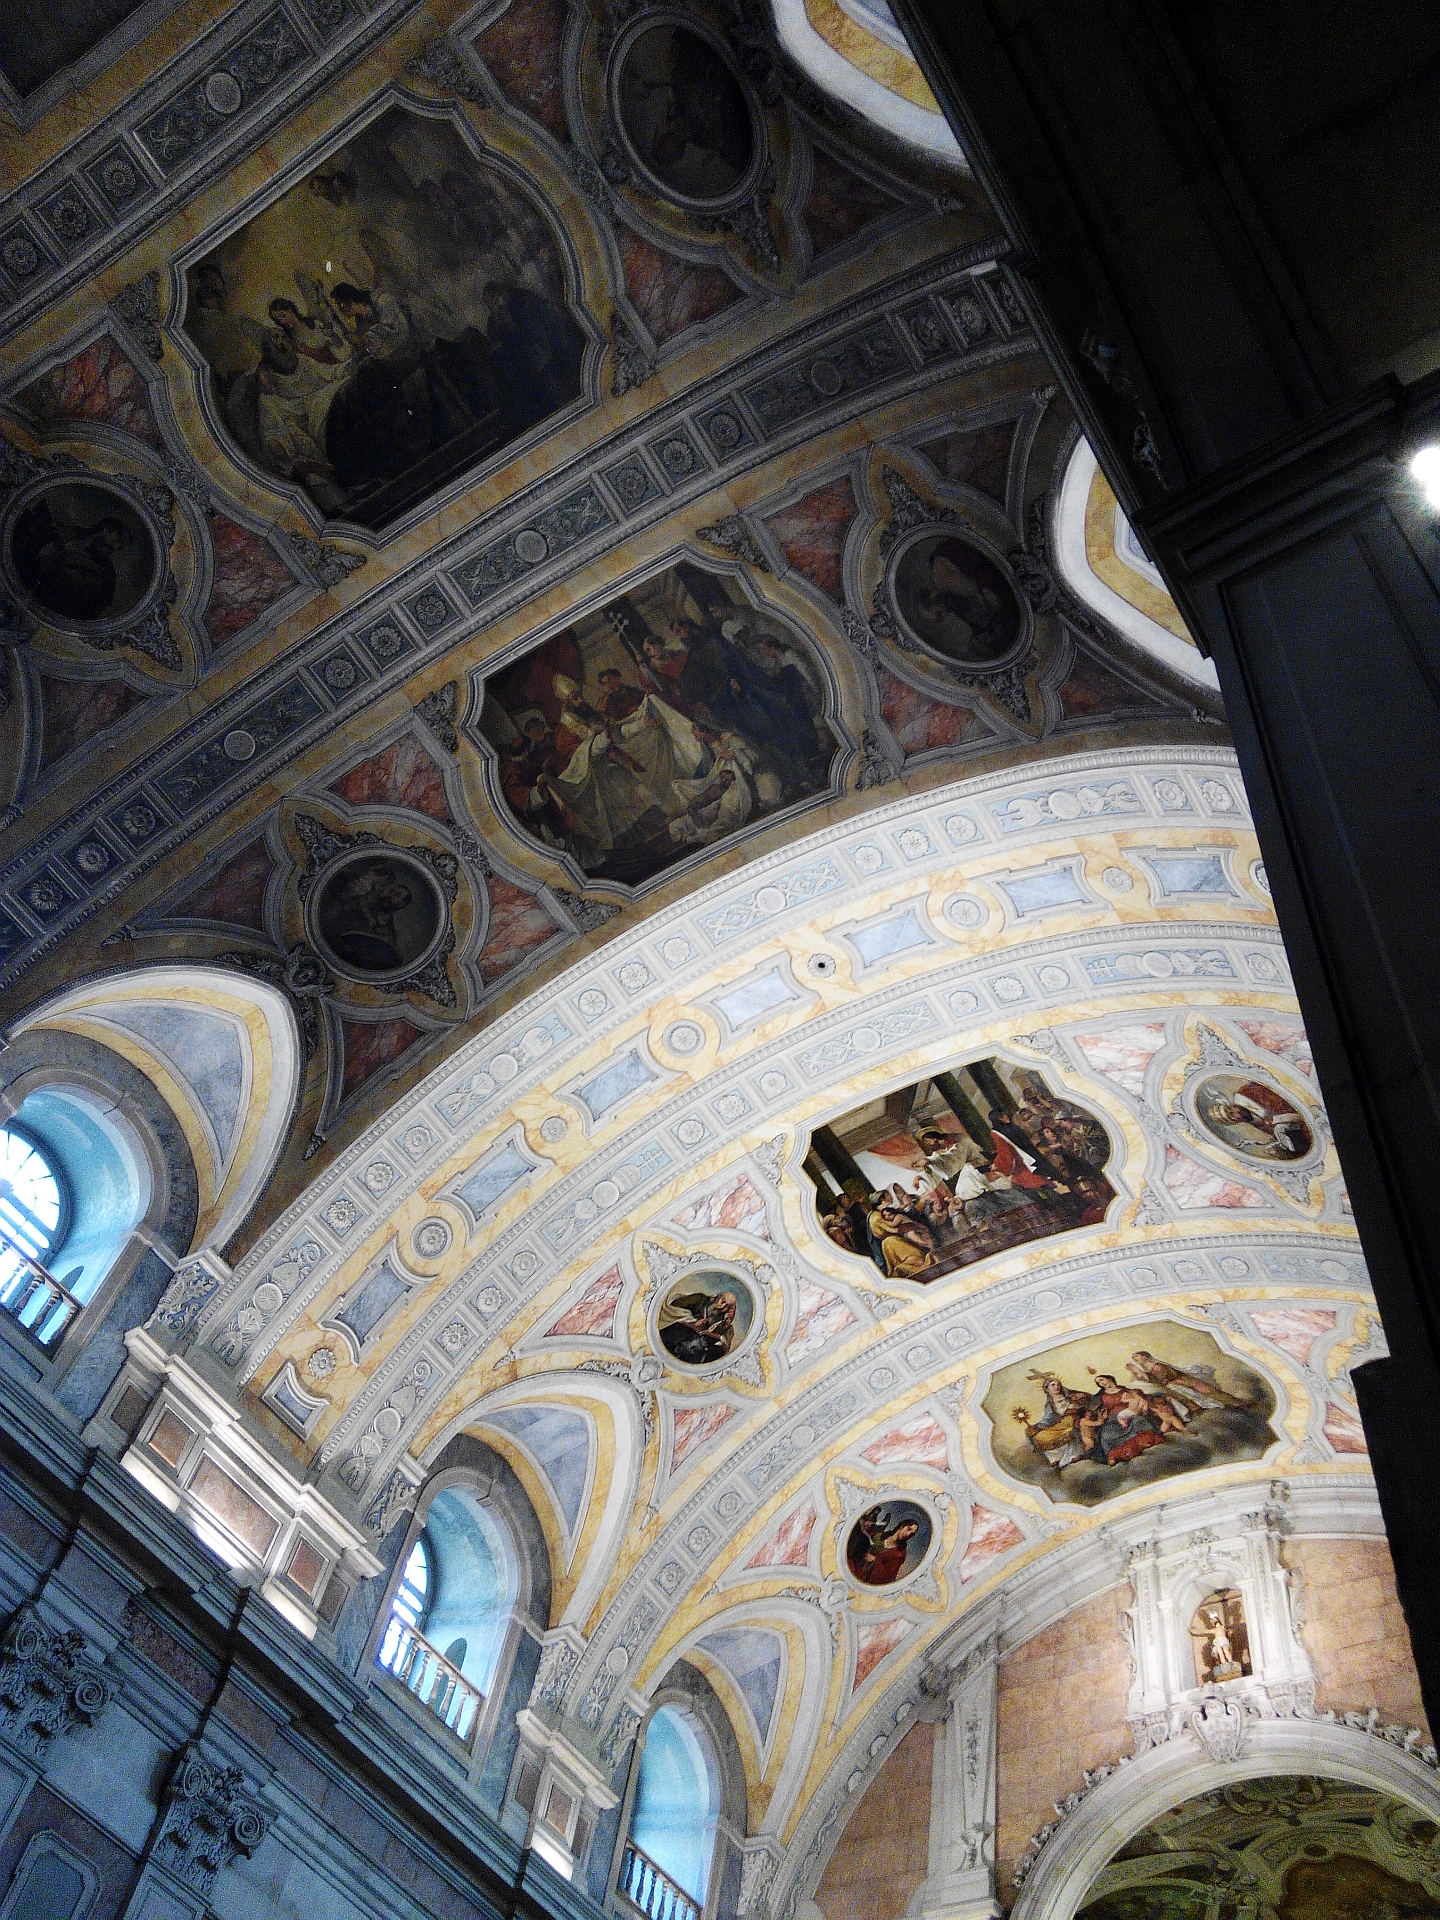 the dome of a church has several paintings on it